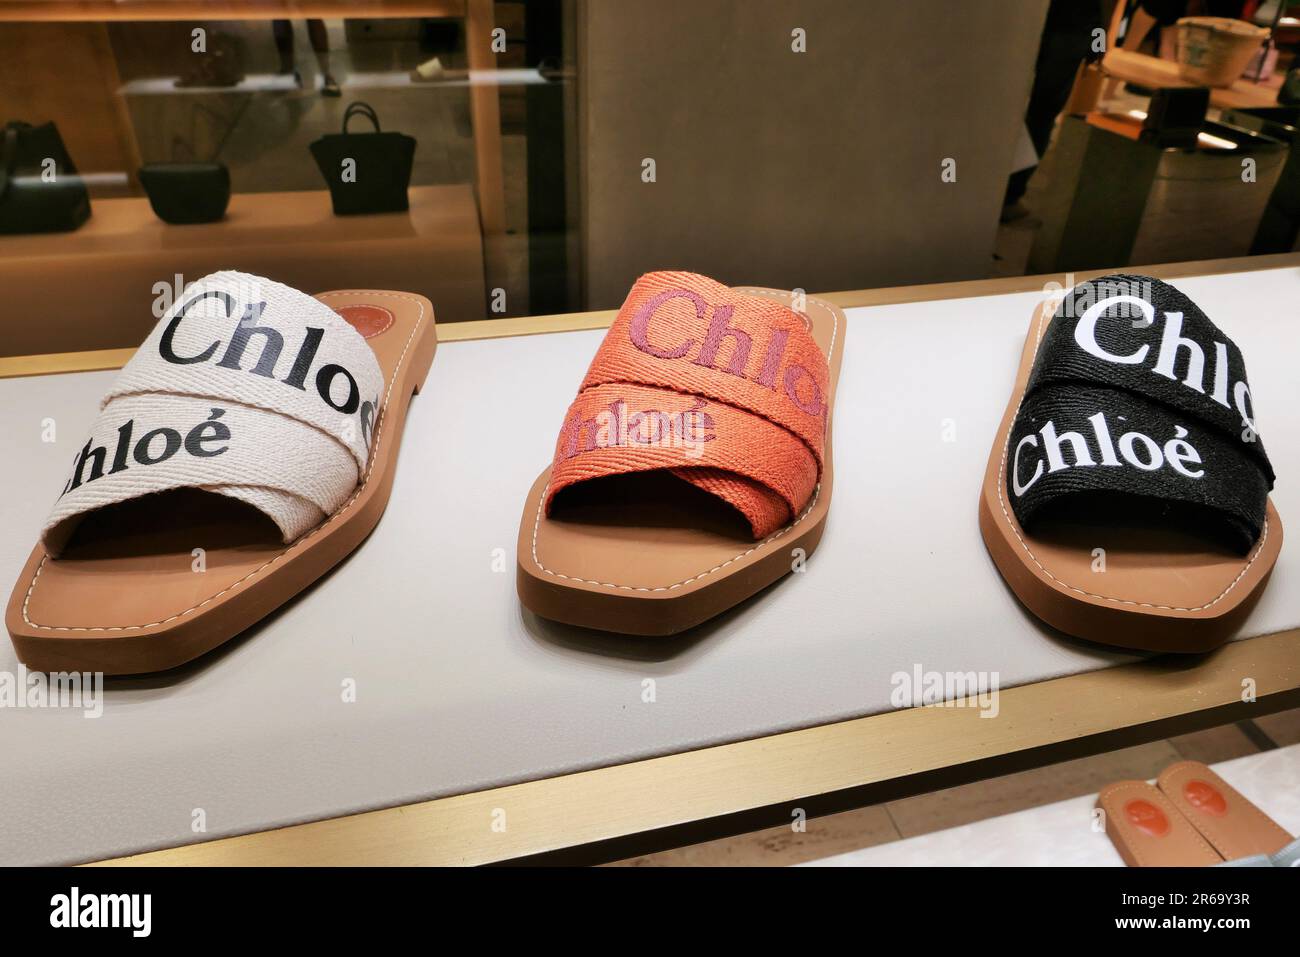 CHLOE' SANDALS ON DISPLAY INSIDE THE FASHION STORE Stock Photo - Alamy